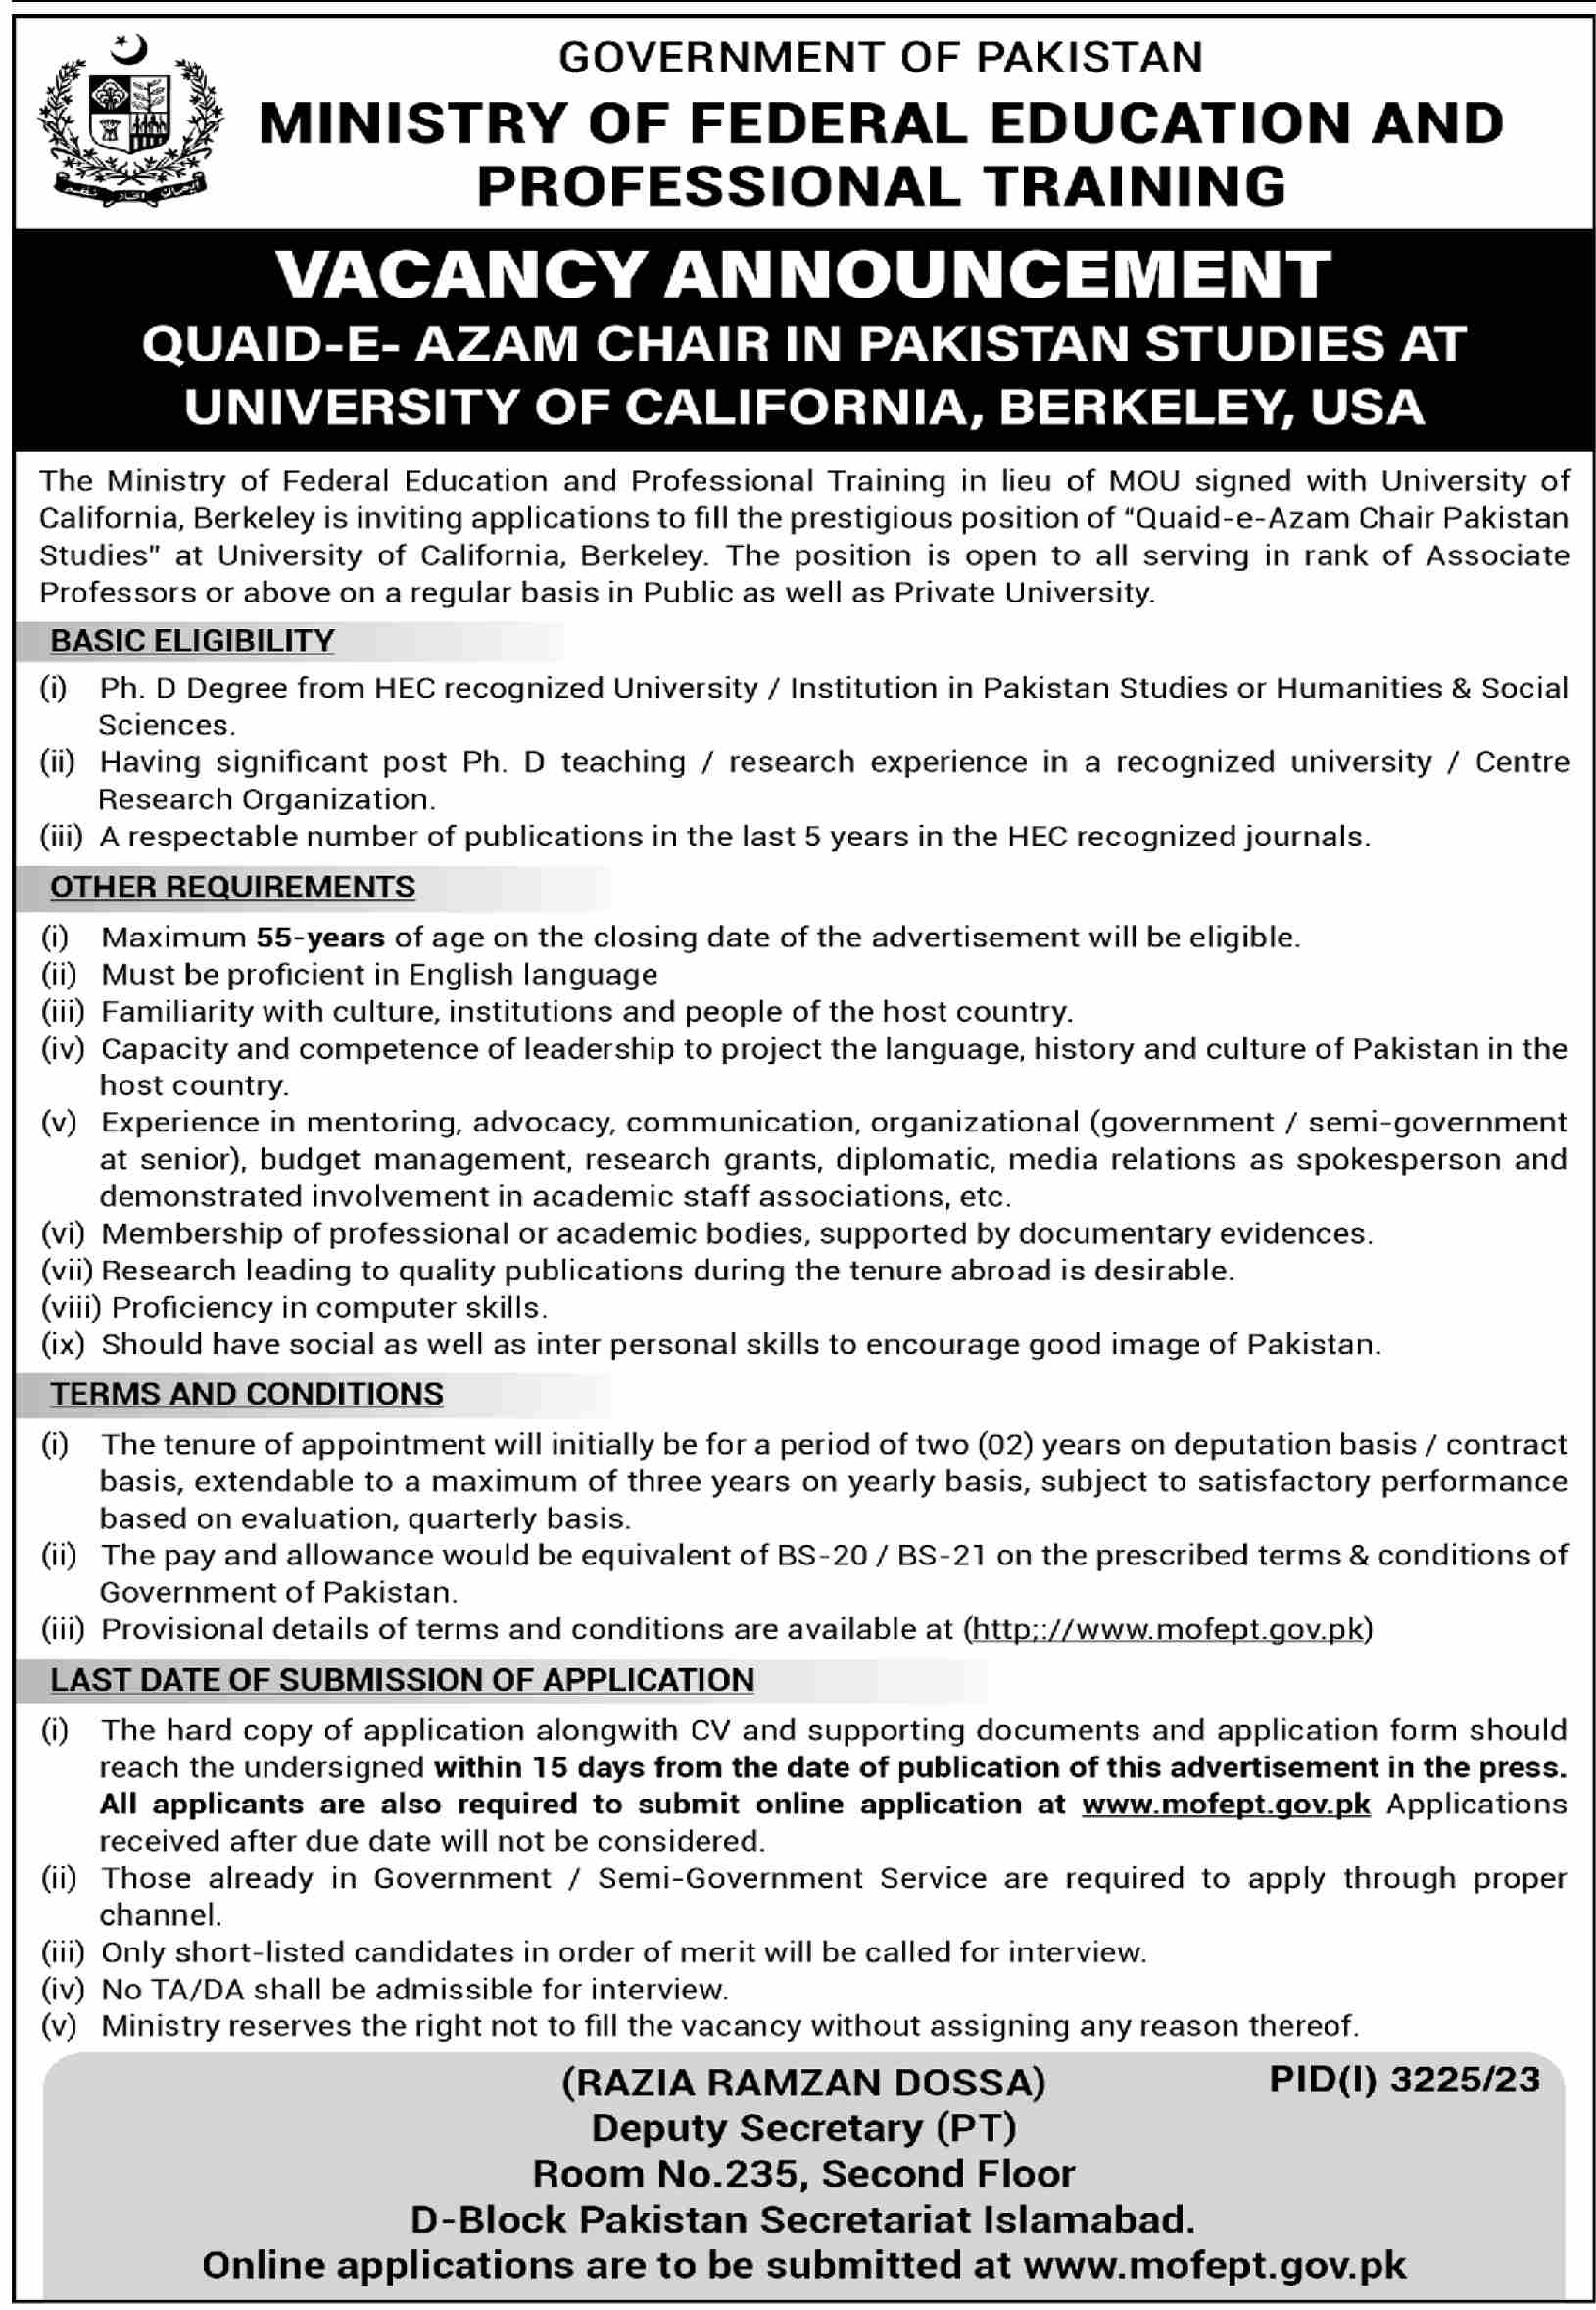 Ministry of Federal Education And Professional Training Islamabad PhD Jobs